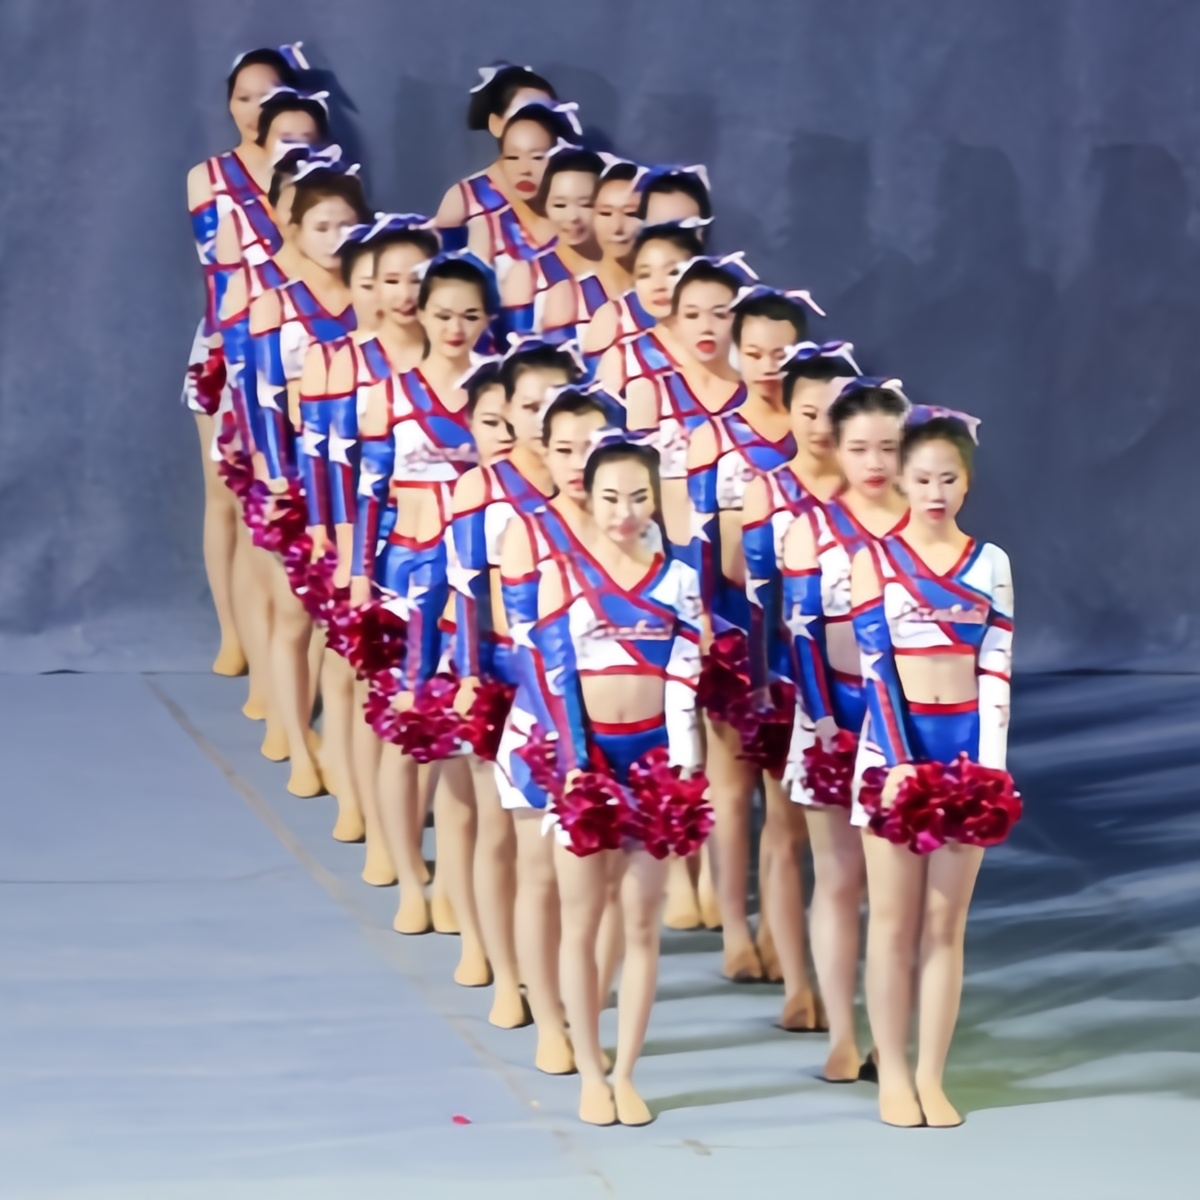  Younique Factory specializes in customizing competition uniforms for the Chinese Cheerleading Championship